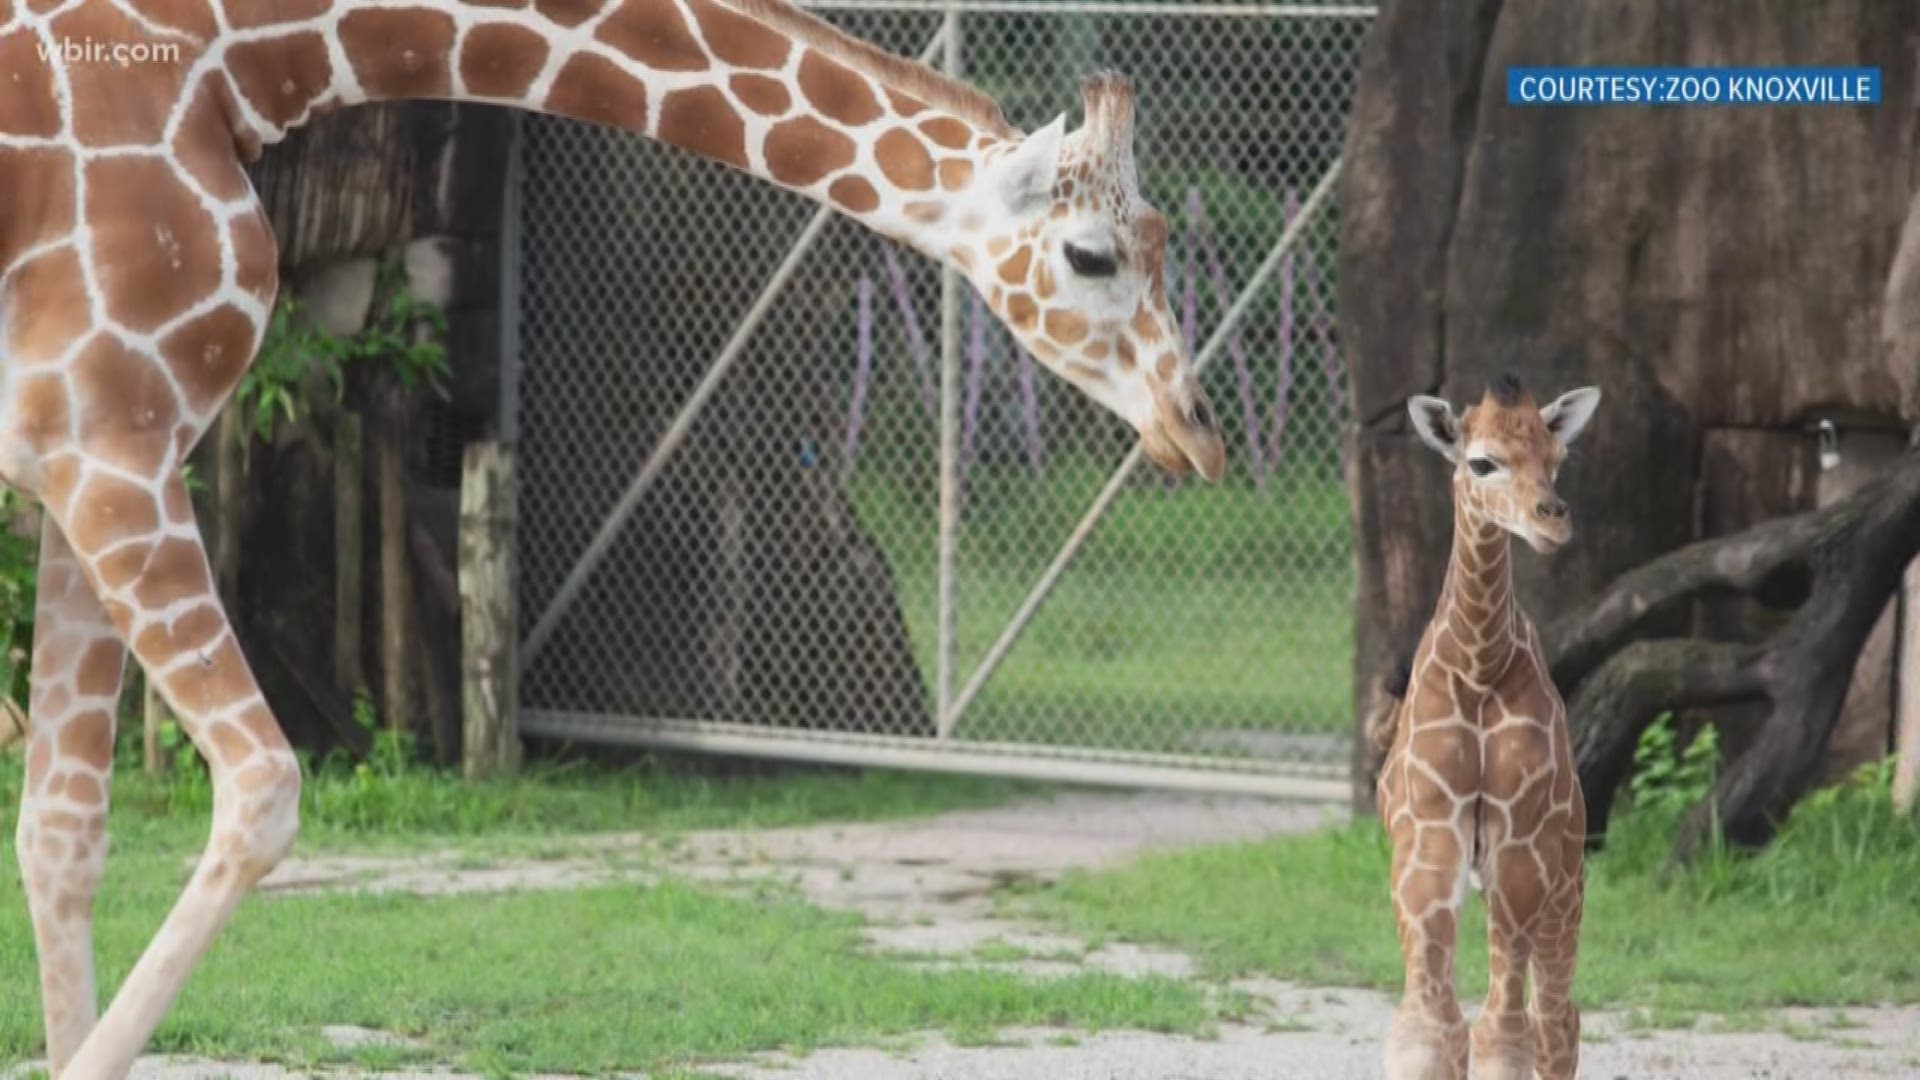 Zoo Knoxville's baby giraffe has been taking her first outings into the Grasslands Africa habitat where the public can see her. Mornings are the best time to catch a sighting of her currently. Zoo Knoxville now has a travel program that gives you the opportunity to journey to Africa to see wildlife in their native range and learn how they can thrive through active conservation management.  T ravel dates are Nov. 10 to 21, 2019, space is limited. Learn more at zooknoxville.org. July 16, 2019-4pm.